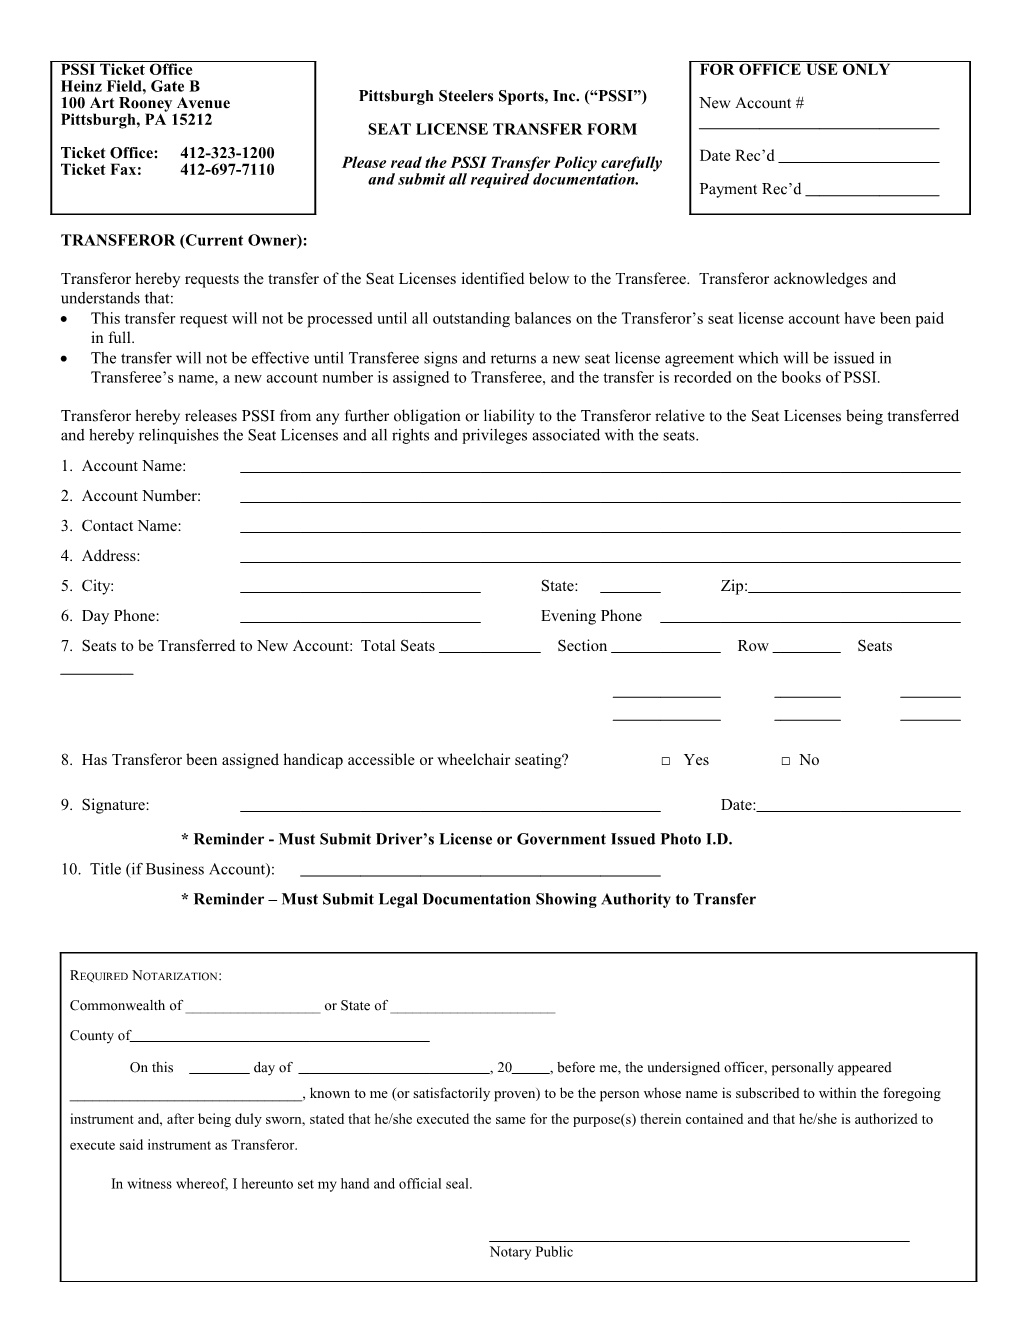 Permanent Seat License Transfer Form